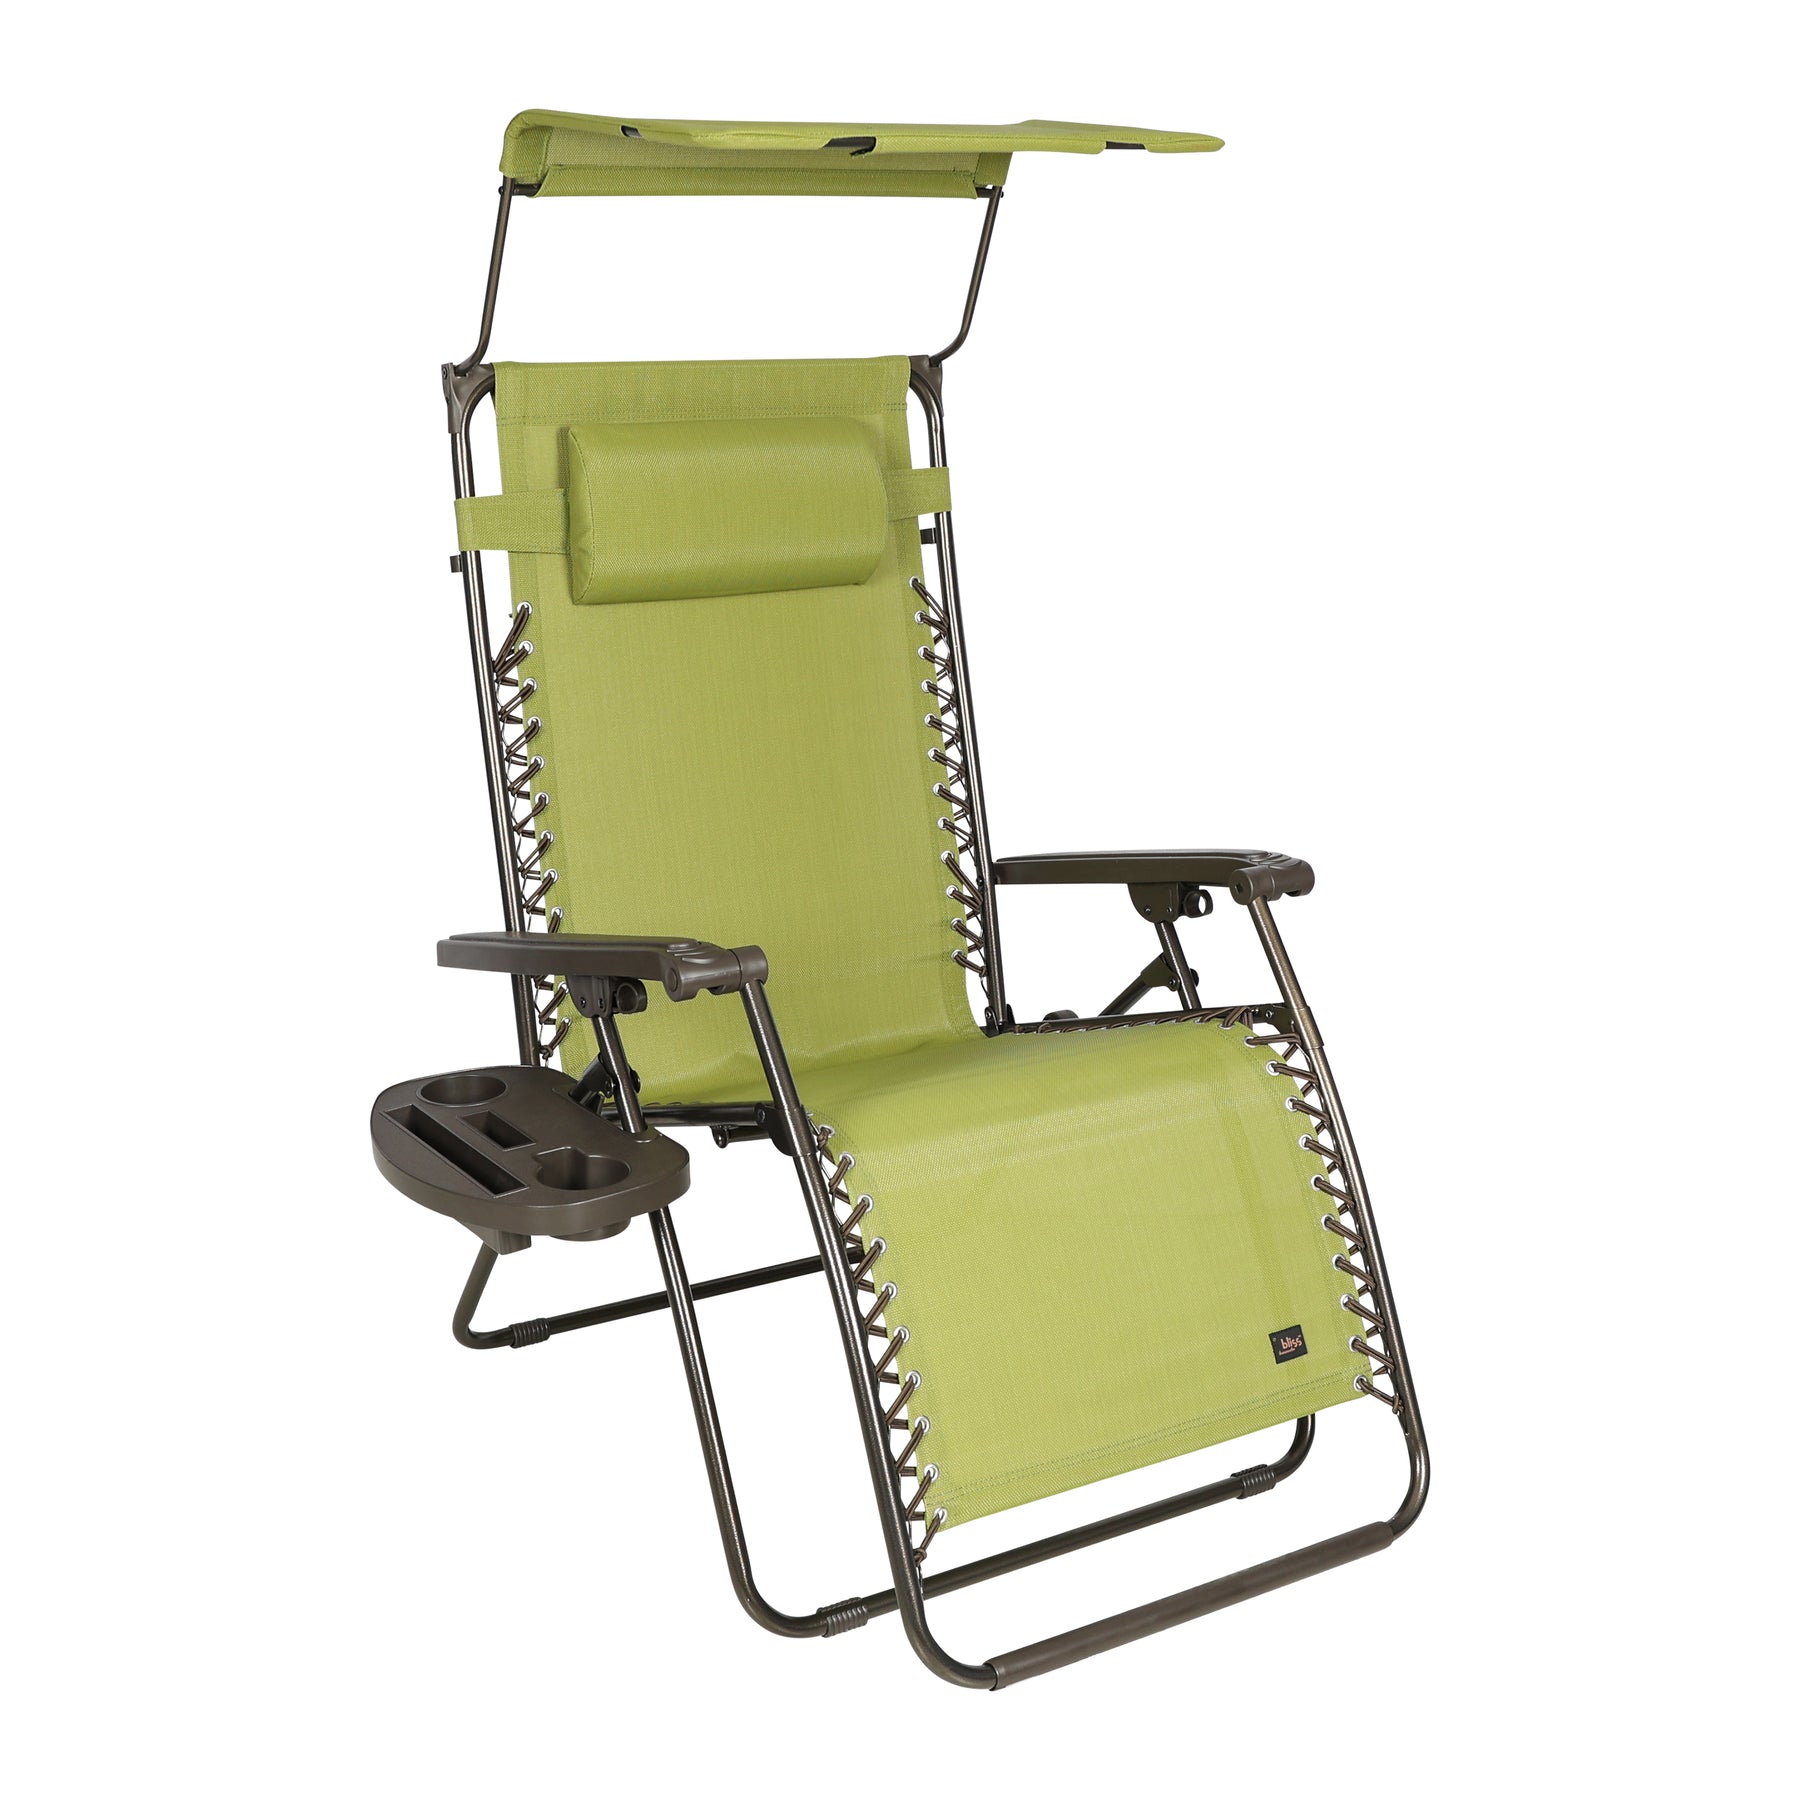 Bliss Hammocks 33-inch Wide XXL Zero Gravity Chair with Adjustable Canopy Sun-Shade, Drink Tray, and Adjustable Pillow in the sage green variation.